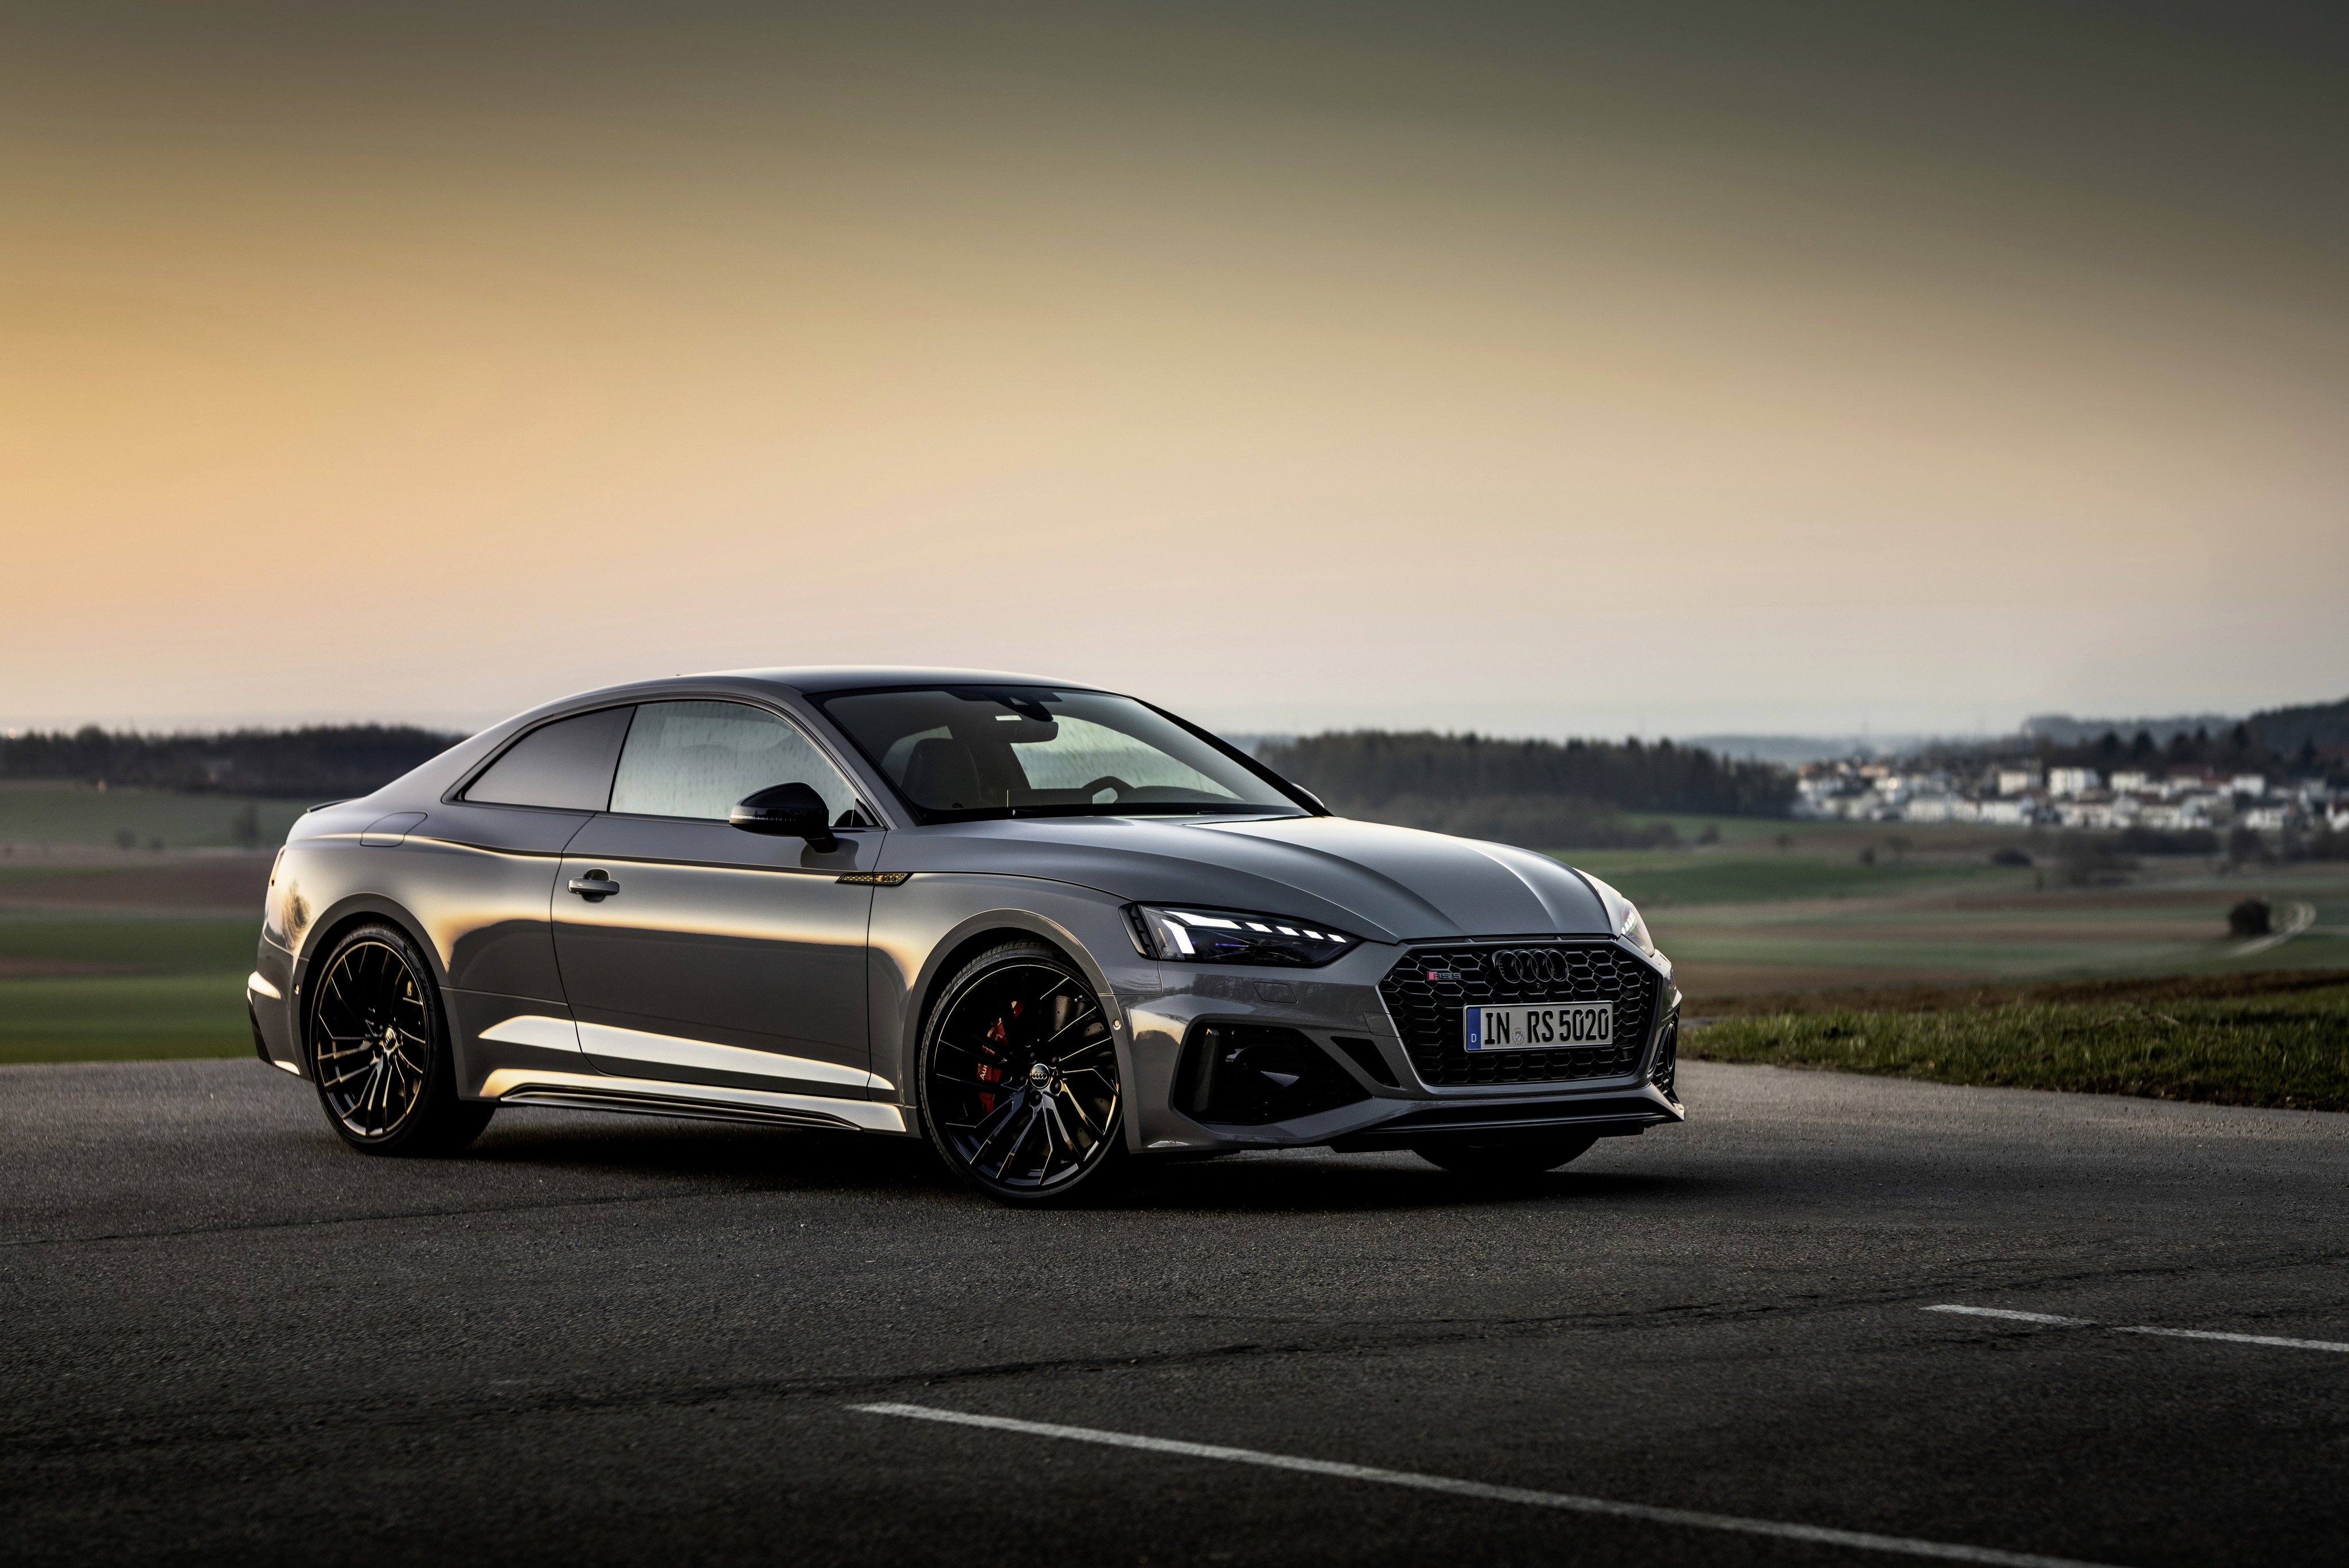 2020 Audi Rs5 Coupe 4k Ultra Hd Wallpaper Background Image 4096x2734